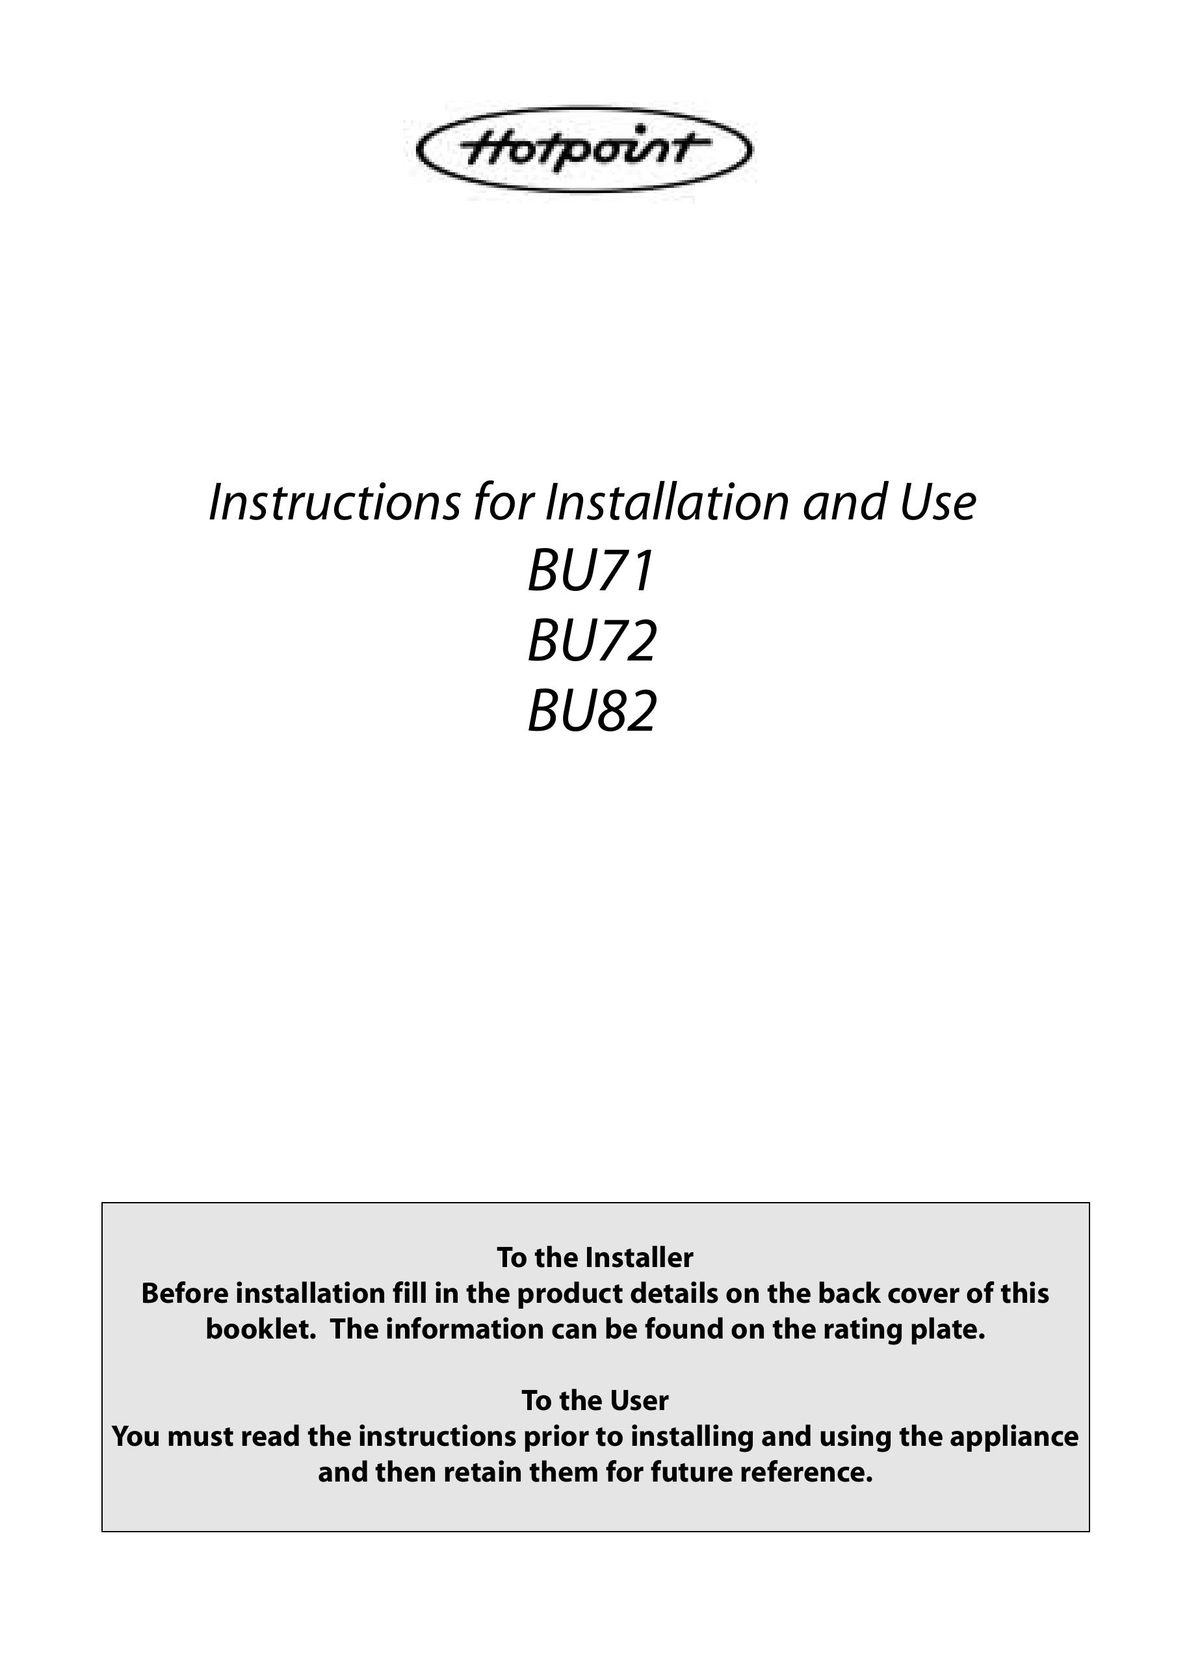 Hotpoint BU71 Oven User Manual